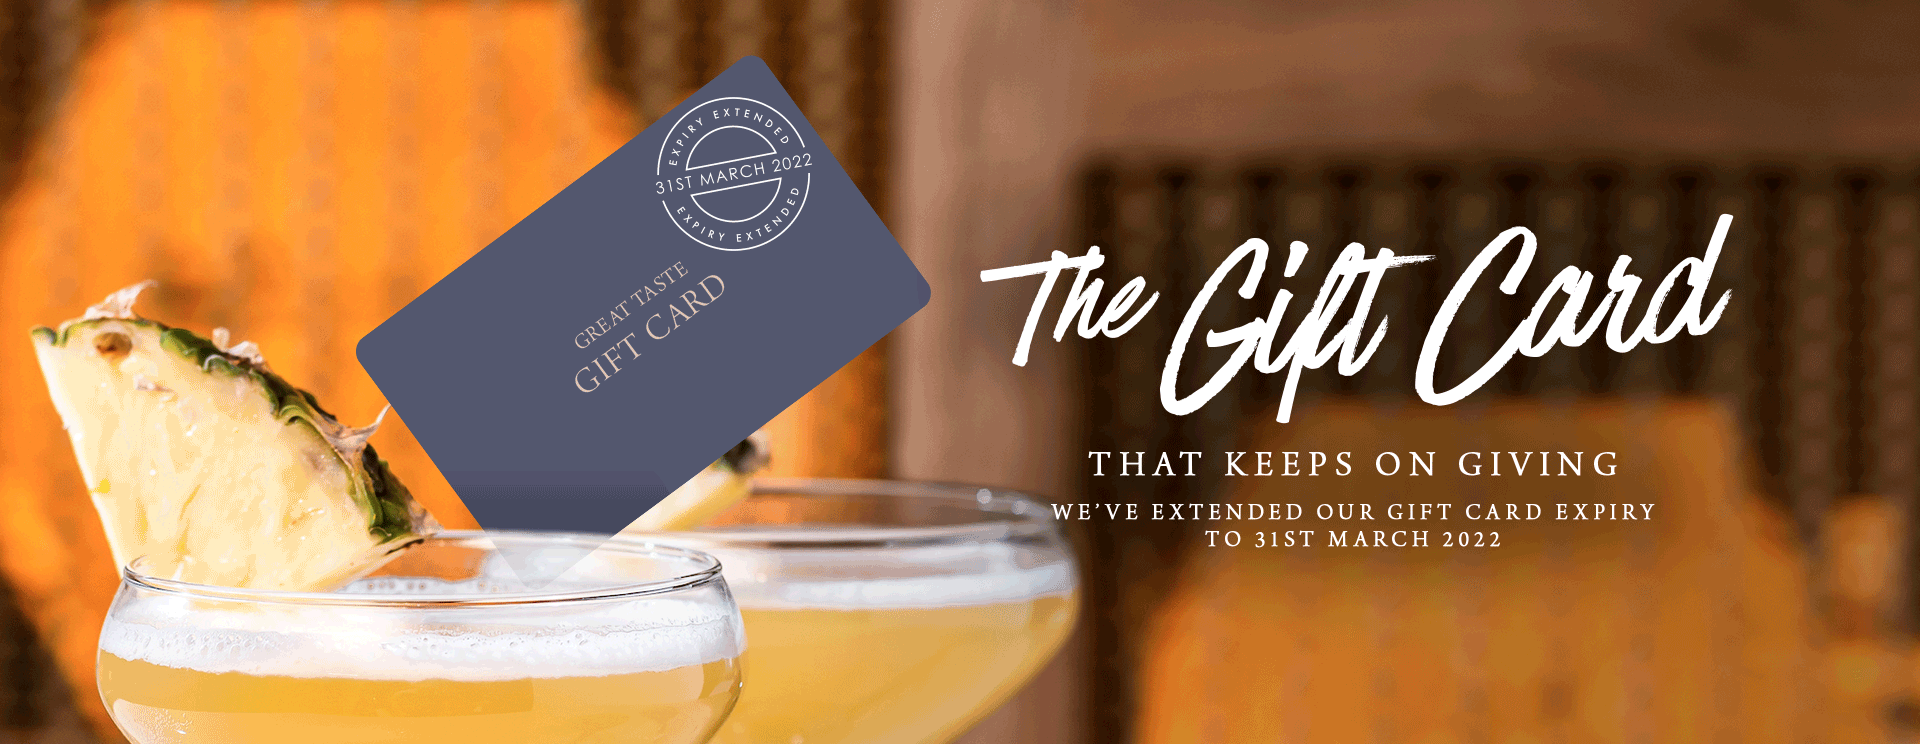 Give the gift of a gift card at The Tudor Rose